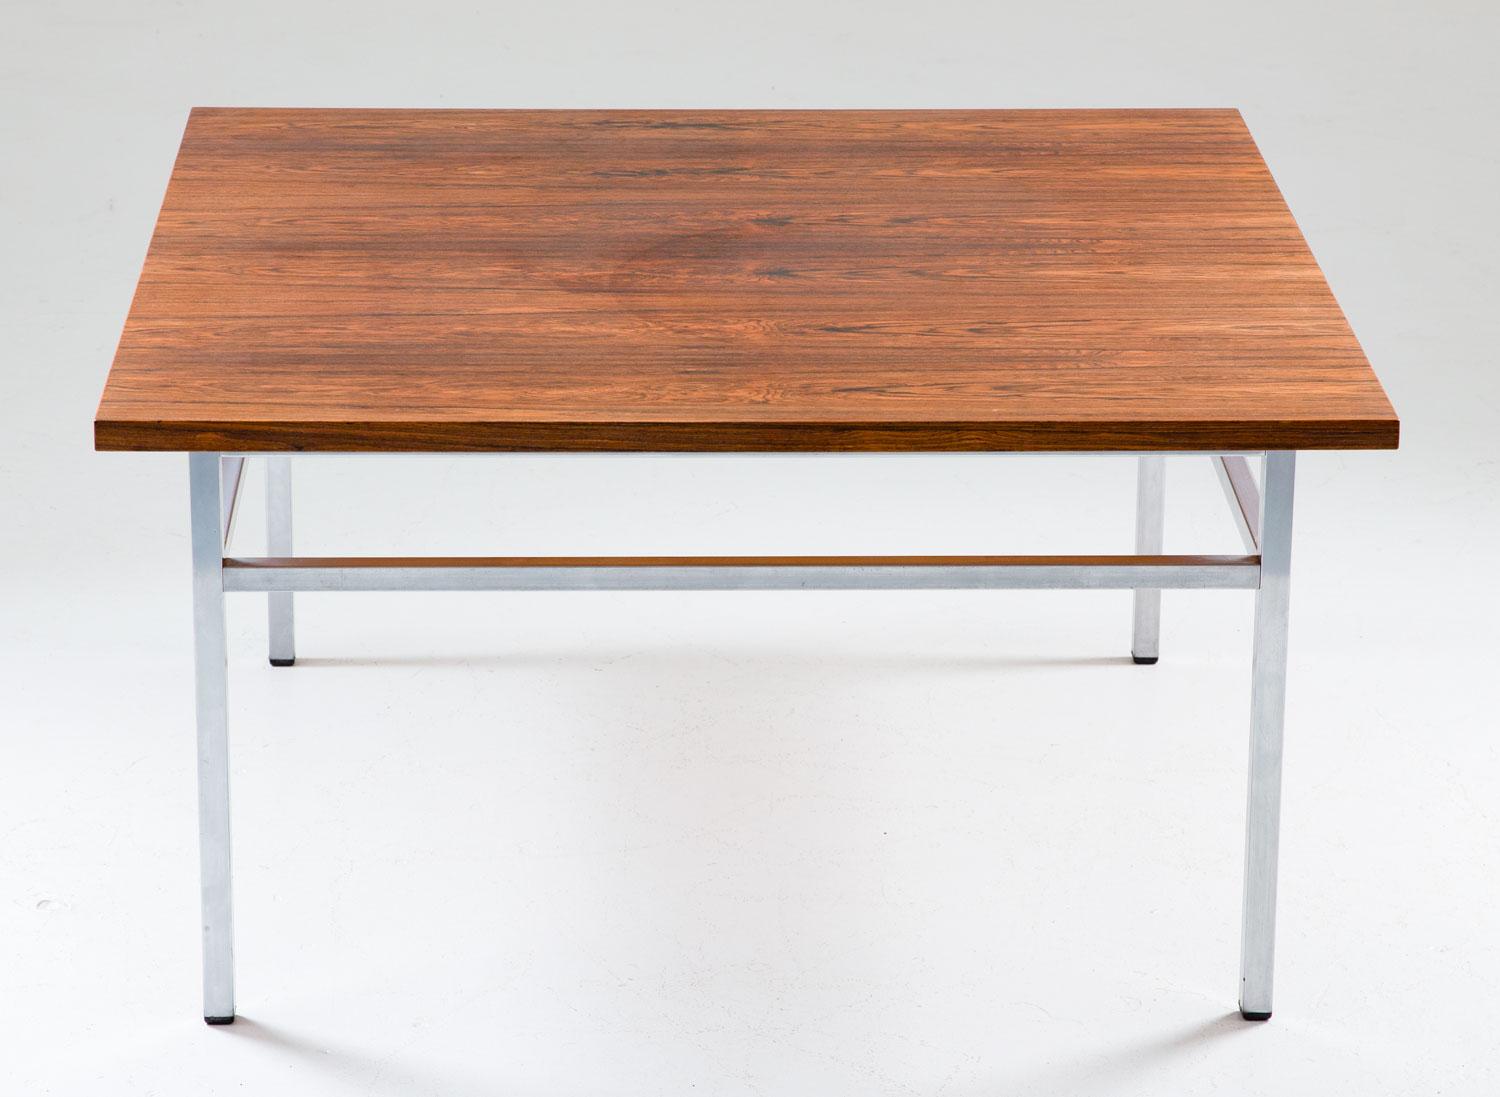 Beautiful rosewood and steel coffee table by Karl-Erik Ekselius for Troeds, Sweden
The table consists of a square rosewood tabletop, supported by a brushed steel frame/legs. 
Condition: Good original condition, light signs of use and age and one